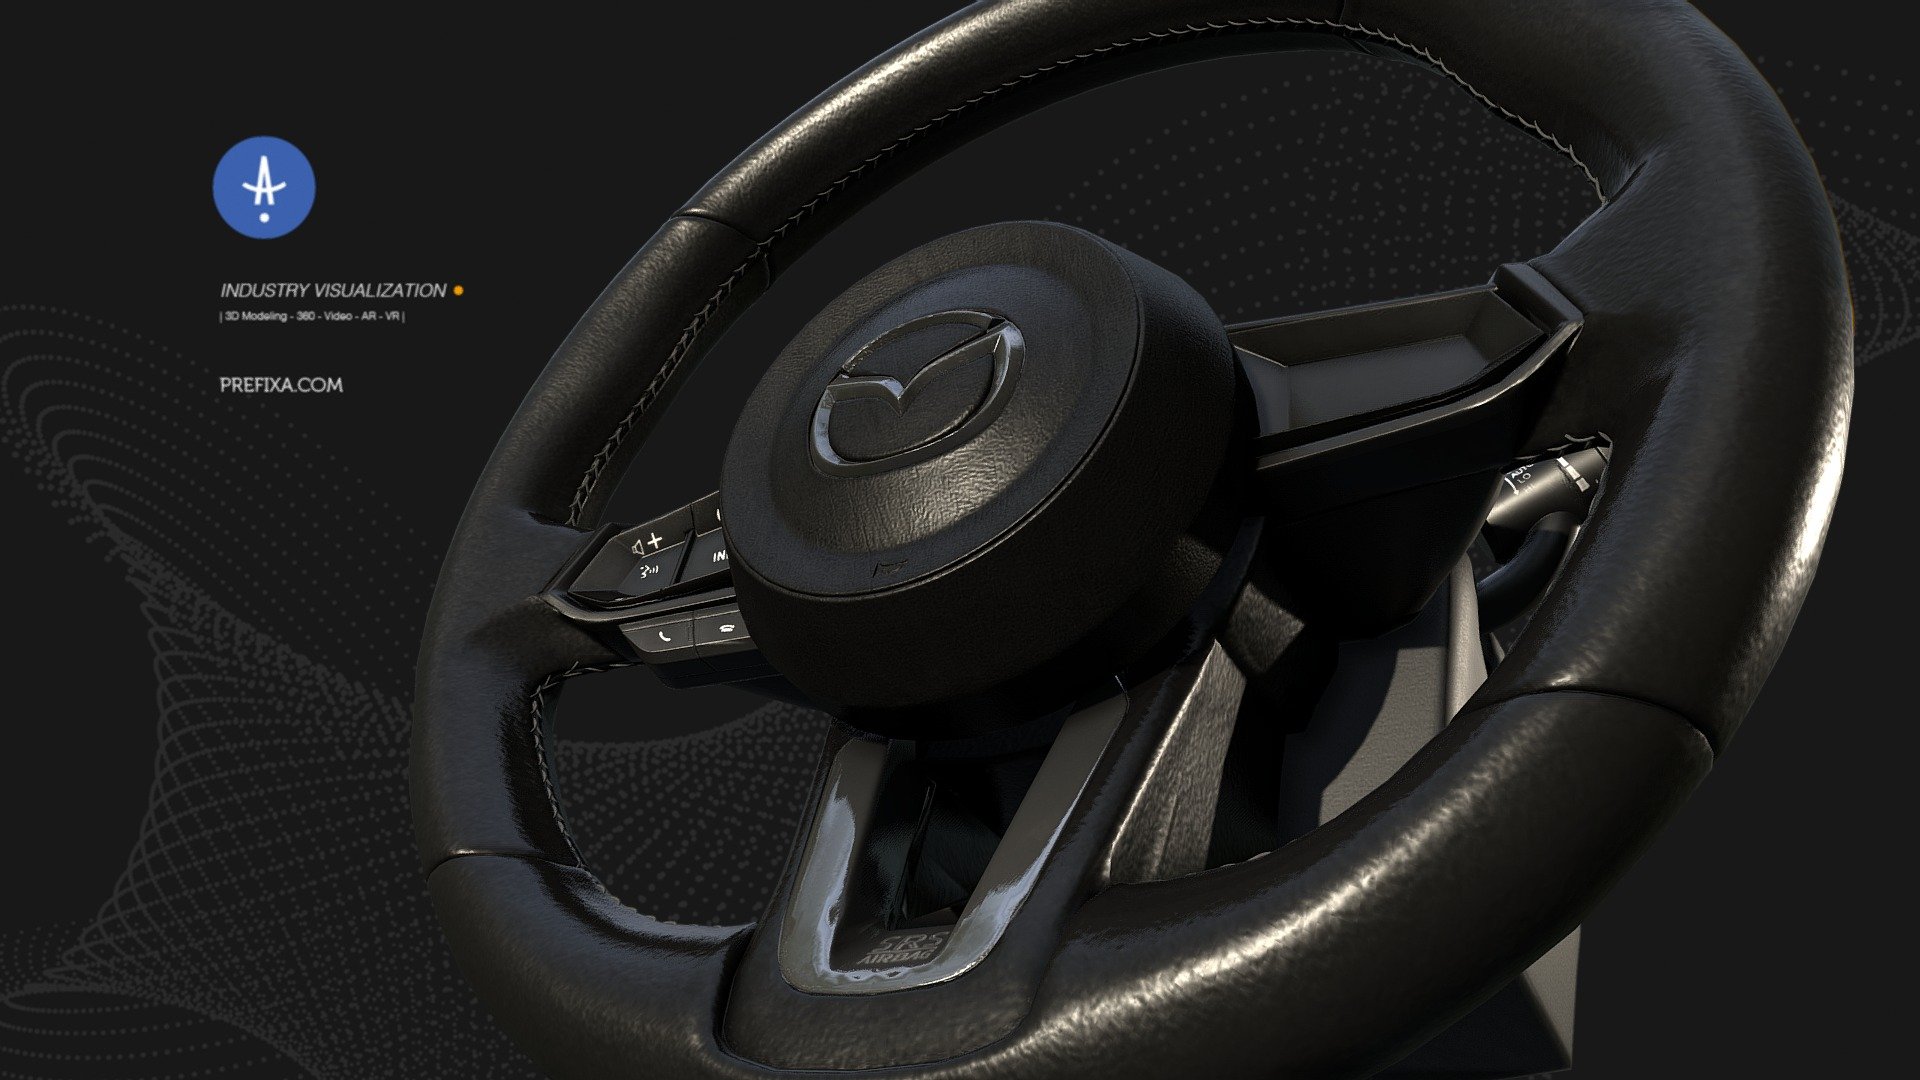 **Steering Wheel **

Category: Industry Visualization

—————————————————————————————




Render and Animation technique  

For Interactive &amp; Online Catalog



www.prefixa.com

—

Copyright mention must be appear for all sharing

© 2020, 3D rendering and animation by Prefixa services - Steering Wheel - 3D model by Prefixa 3d model